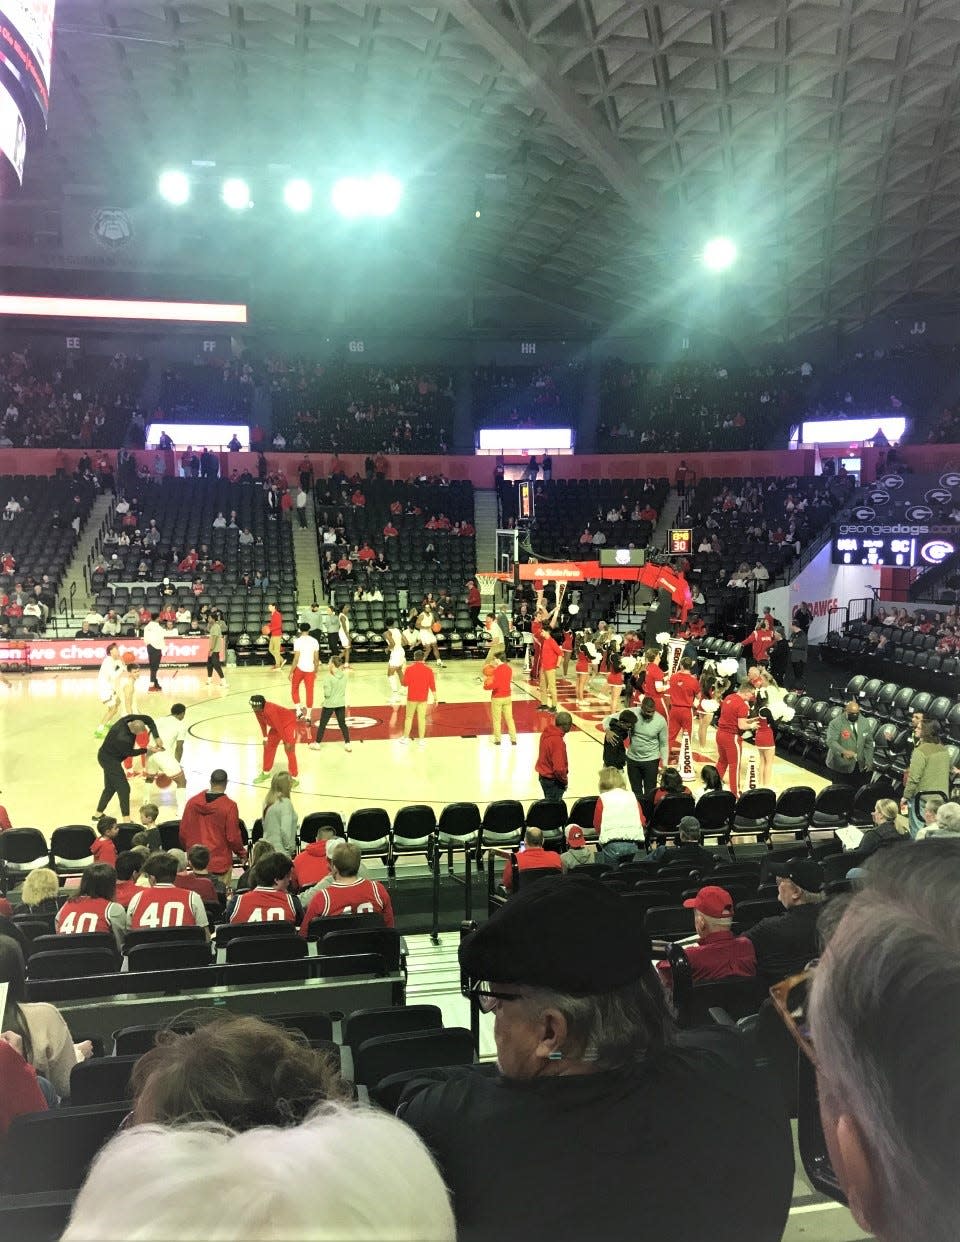 Material fell from the ceiling of Stegeman Coliseum prompting its closure for an undetermined time.